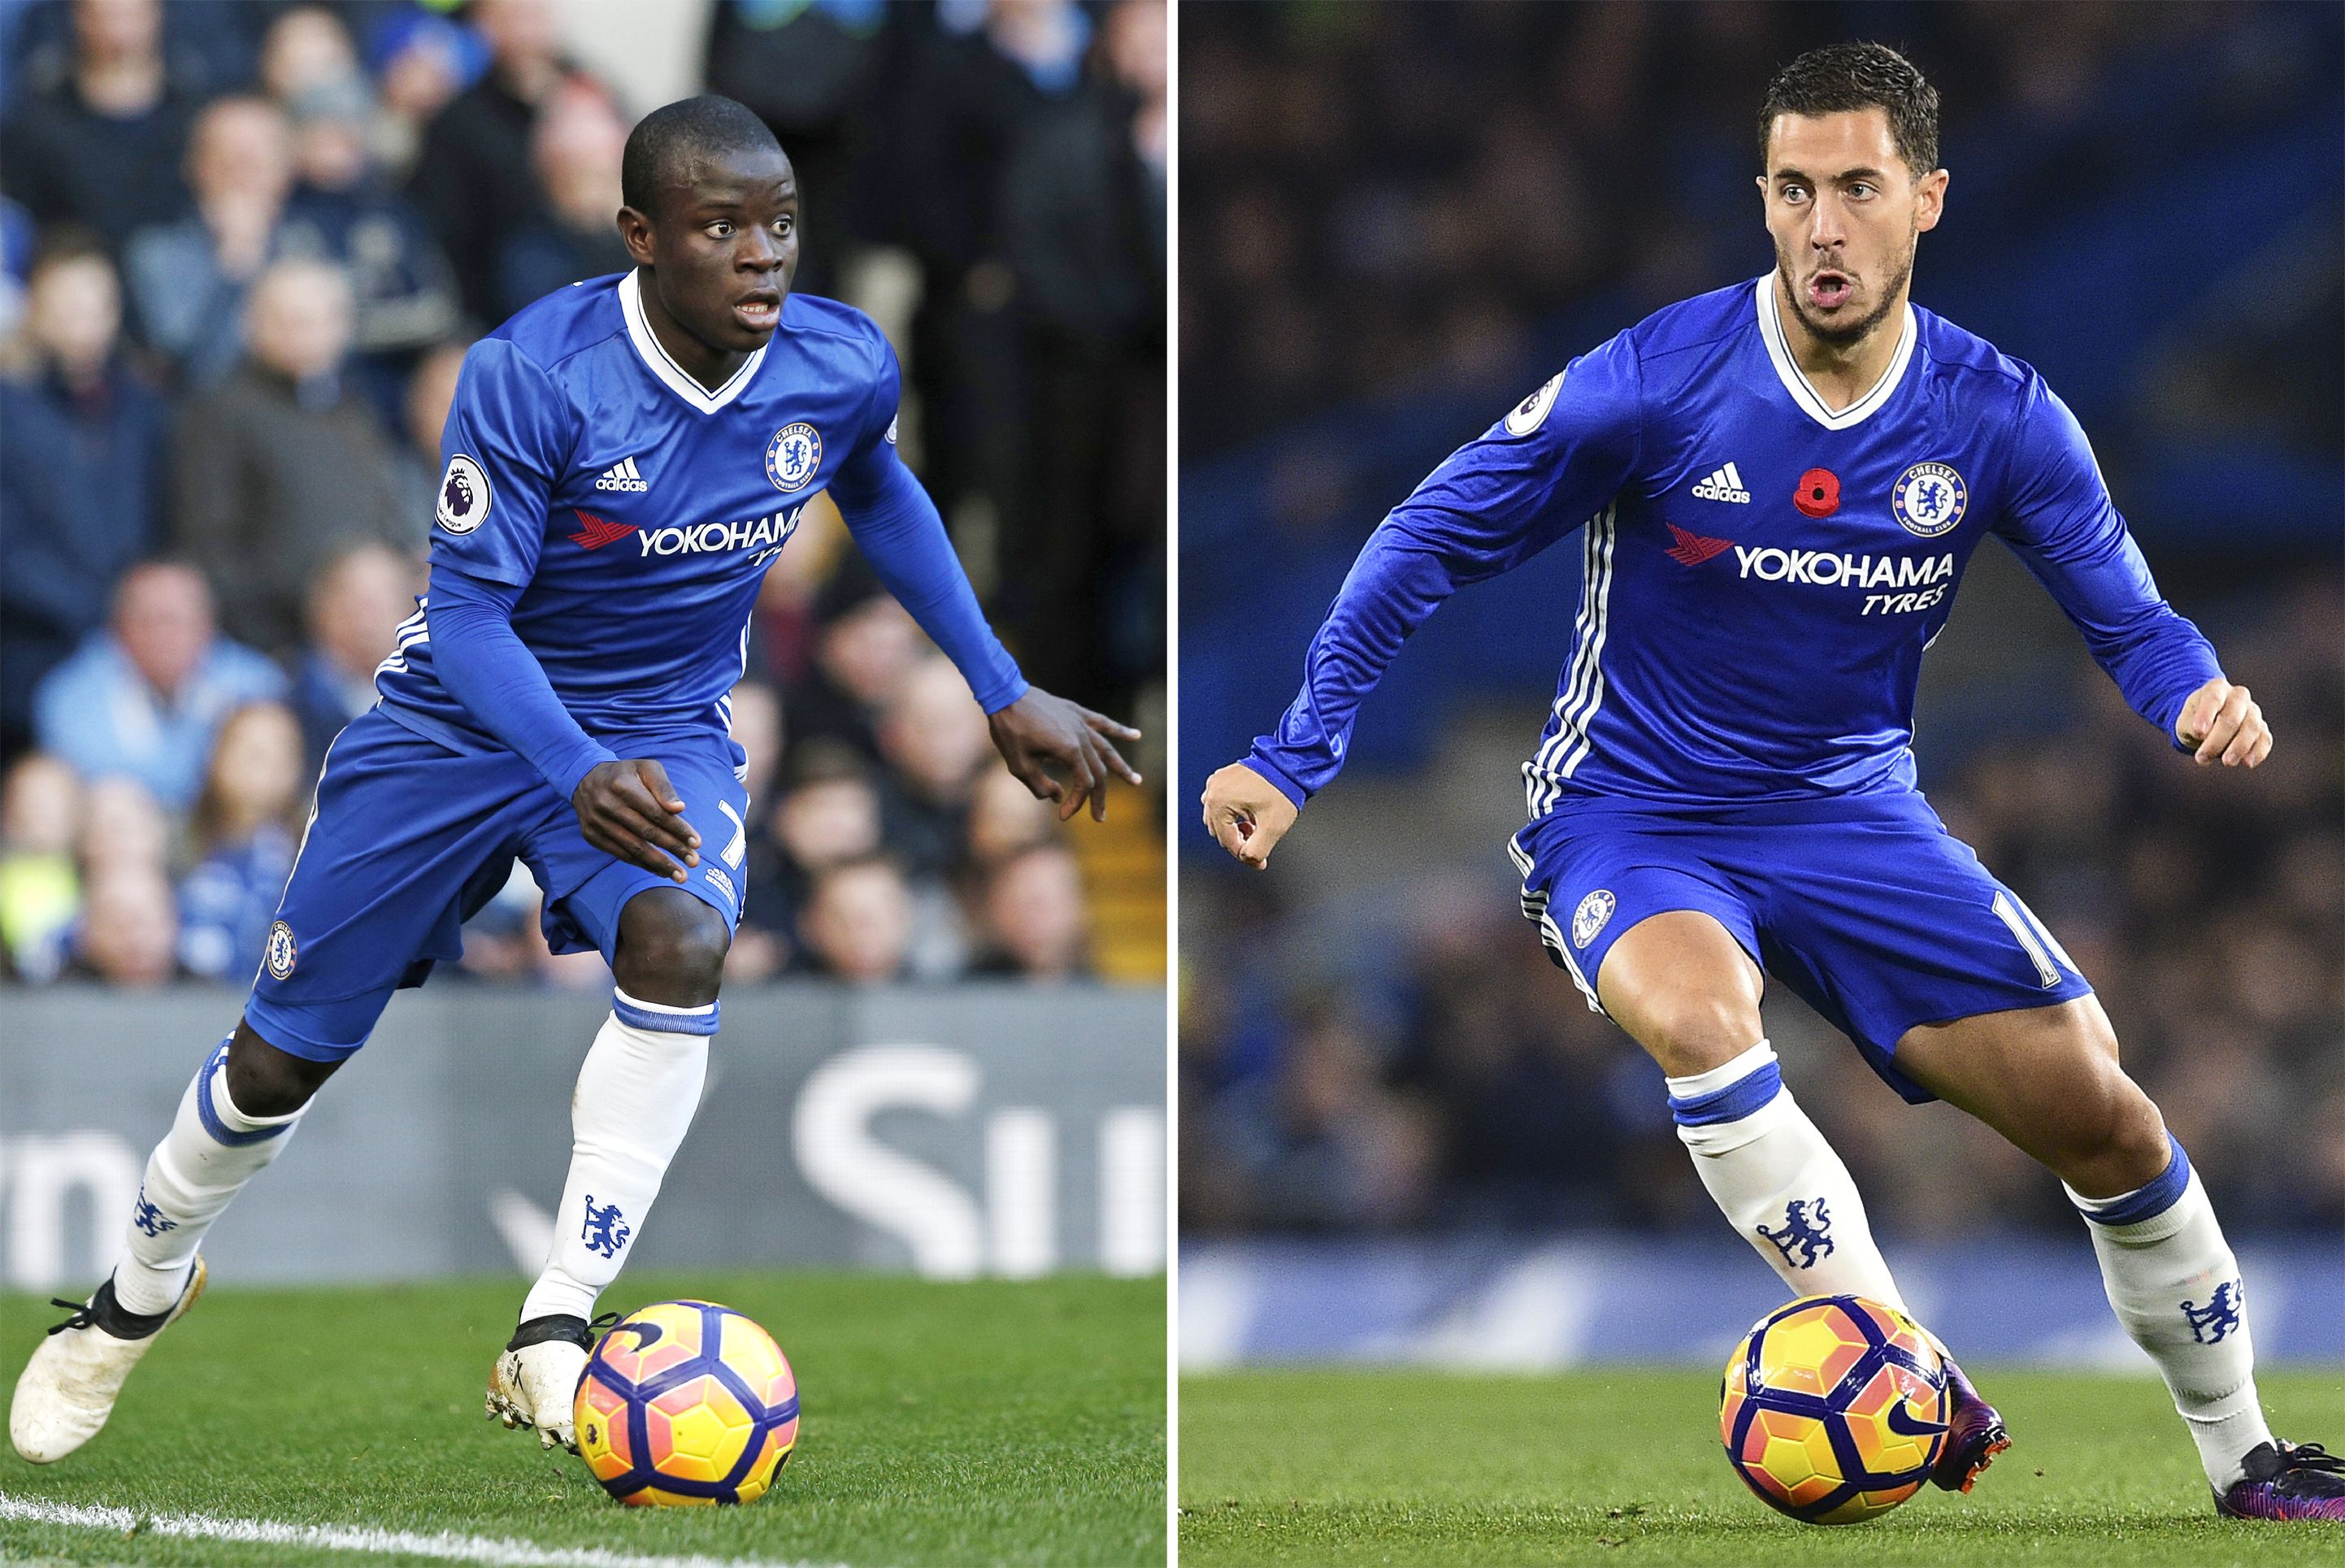 A combo picture shows Chelsea's French midfielder N'Golo Kante (L) and Chelsea's Belgian midfielder Eden Hazard in action during Premier league matches.
N'Golo Kante and Eden Hazard have seen their key roles in Chelsea's bid for the Premier League title acknowledged with nominations for England's Professional Footballers' Association Player of the Year award on April 13, 2017. / AFP PHOTO / Glyn KIRK        (Photo credit should read GLYN KIRK/AFP/Getty Images)